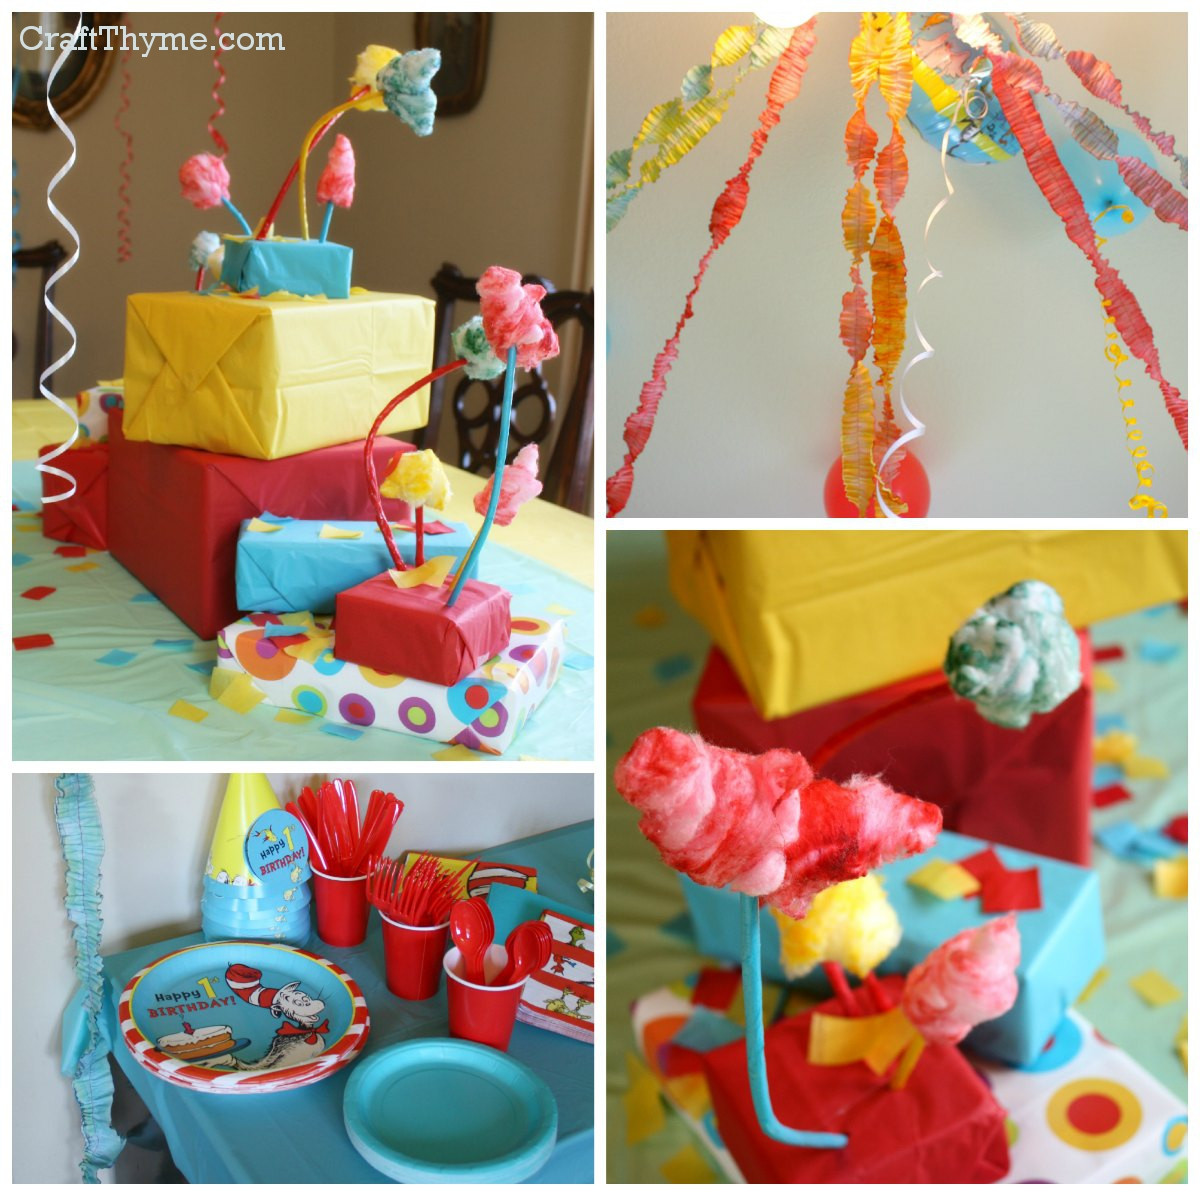 Dr Seuss Party Supplies 1st Birthday
 Dr Seuss Themed First Birthday • Craft Thyme